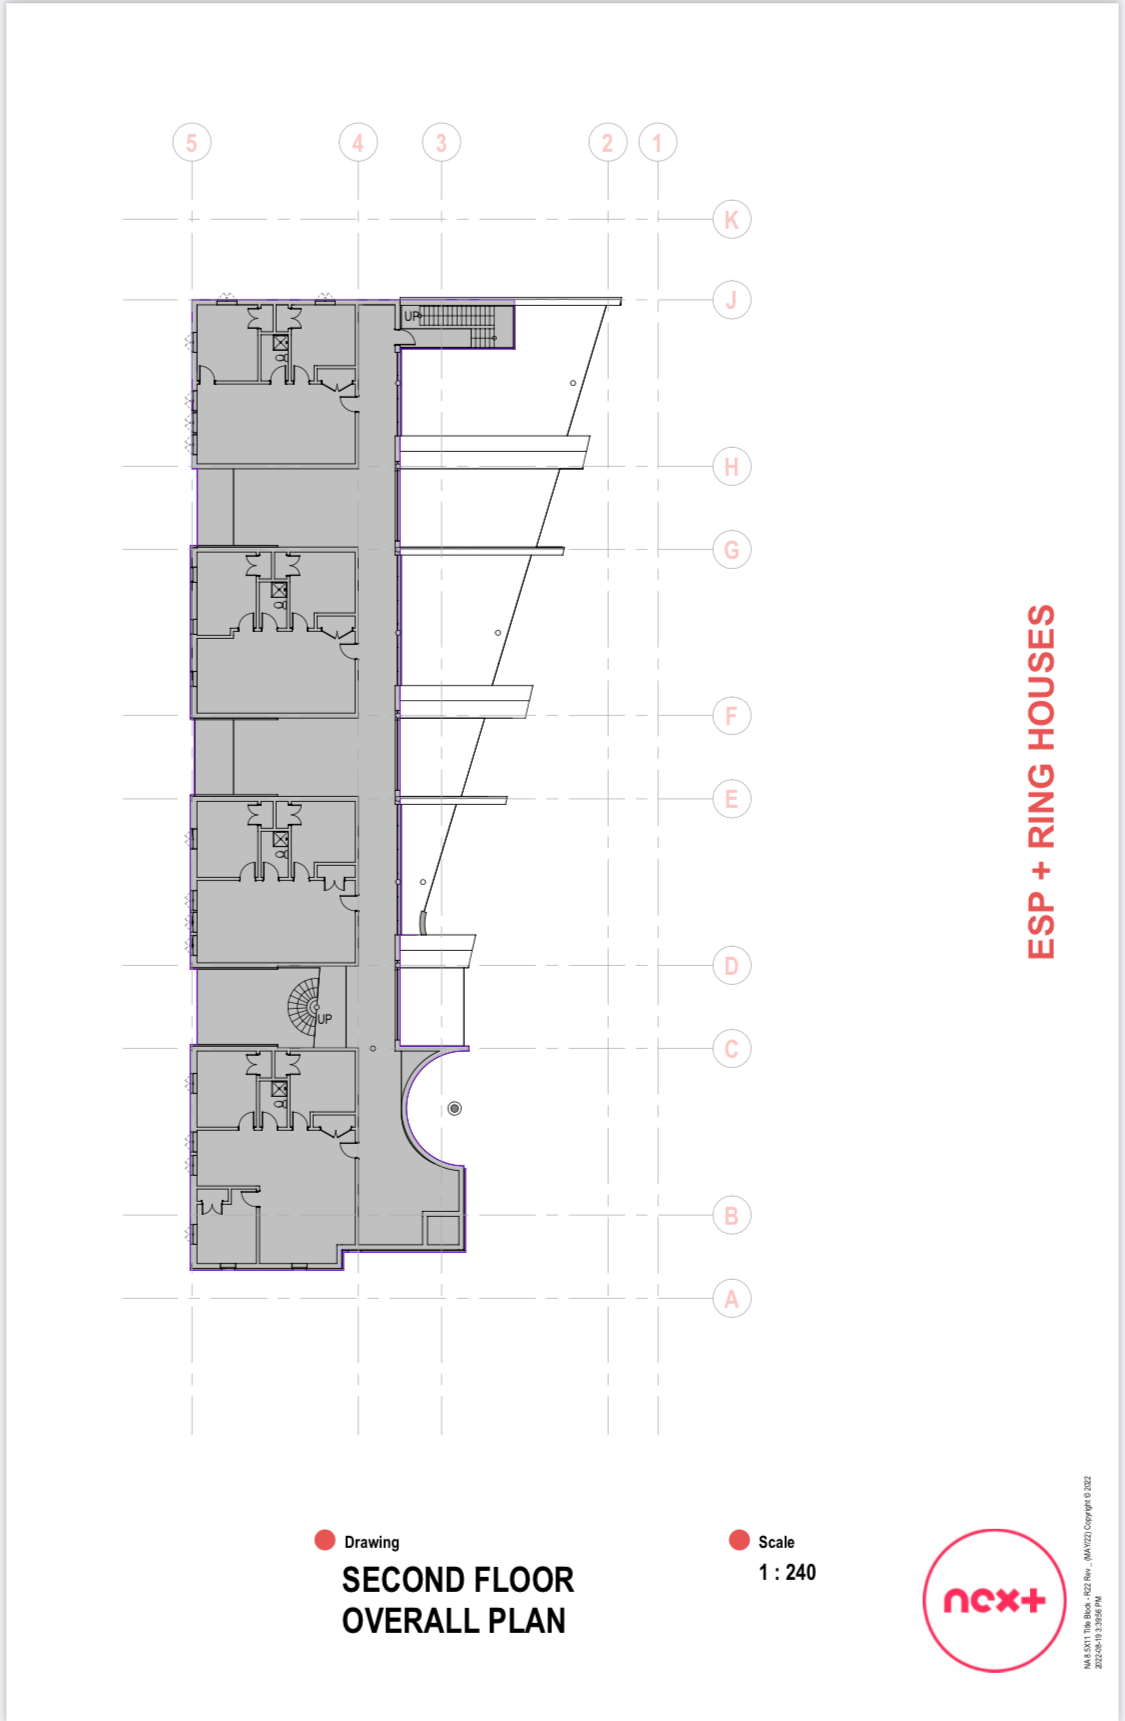 cropped second floor plan photo.png